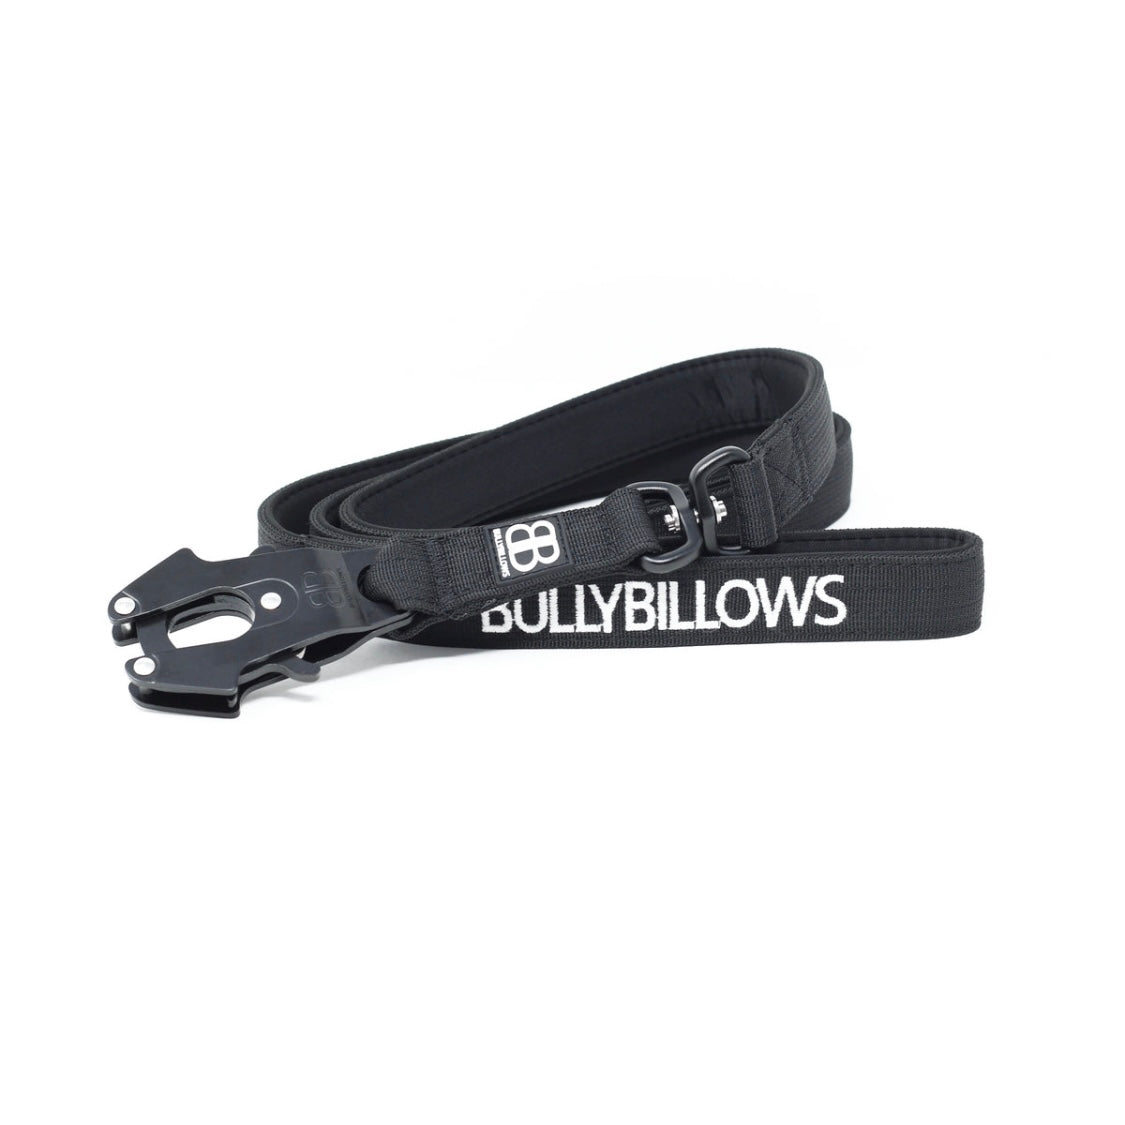 1.4m Swivel Combat Lead | Neoprene Lined, Secure Rated Clip with Soft Handle - Black